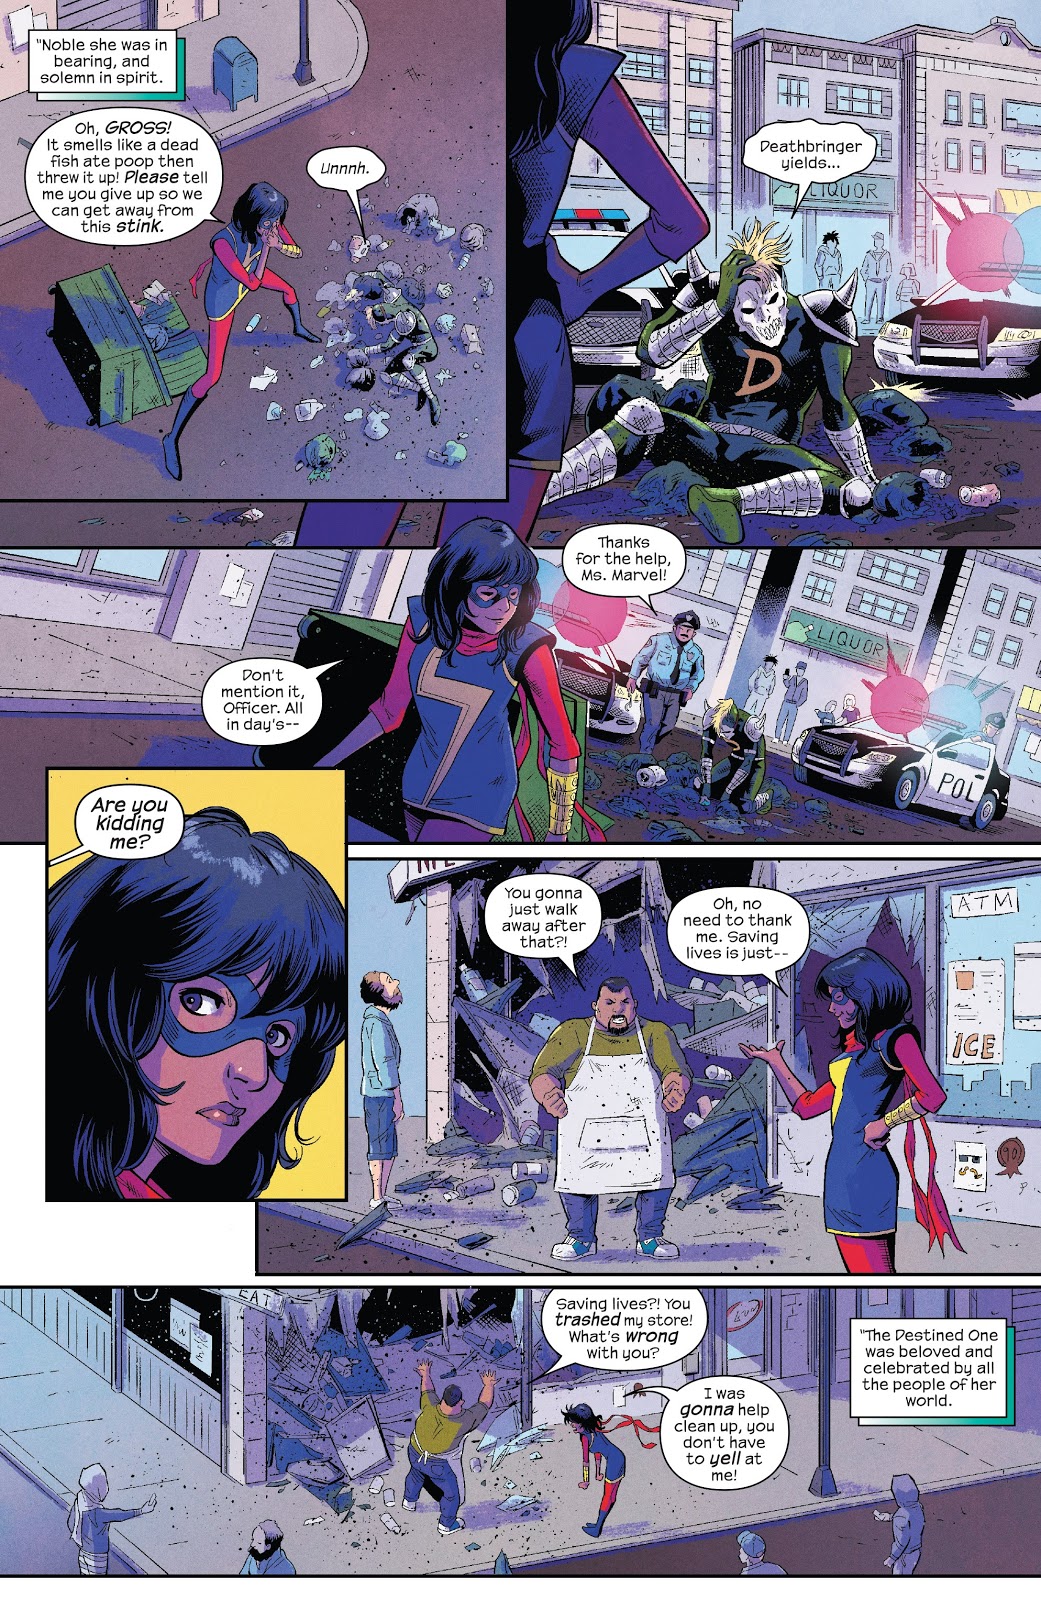 Ms Marvel Destined review